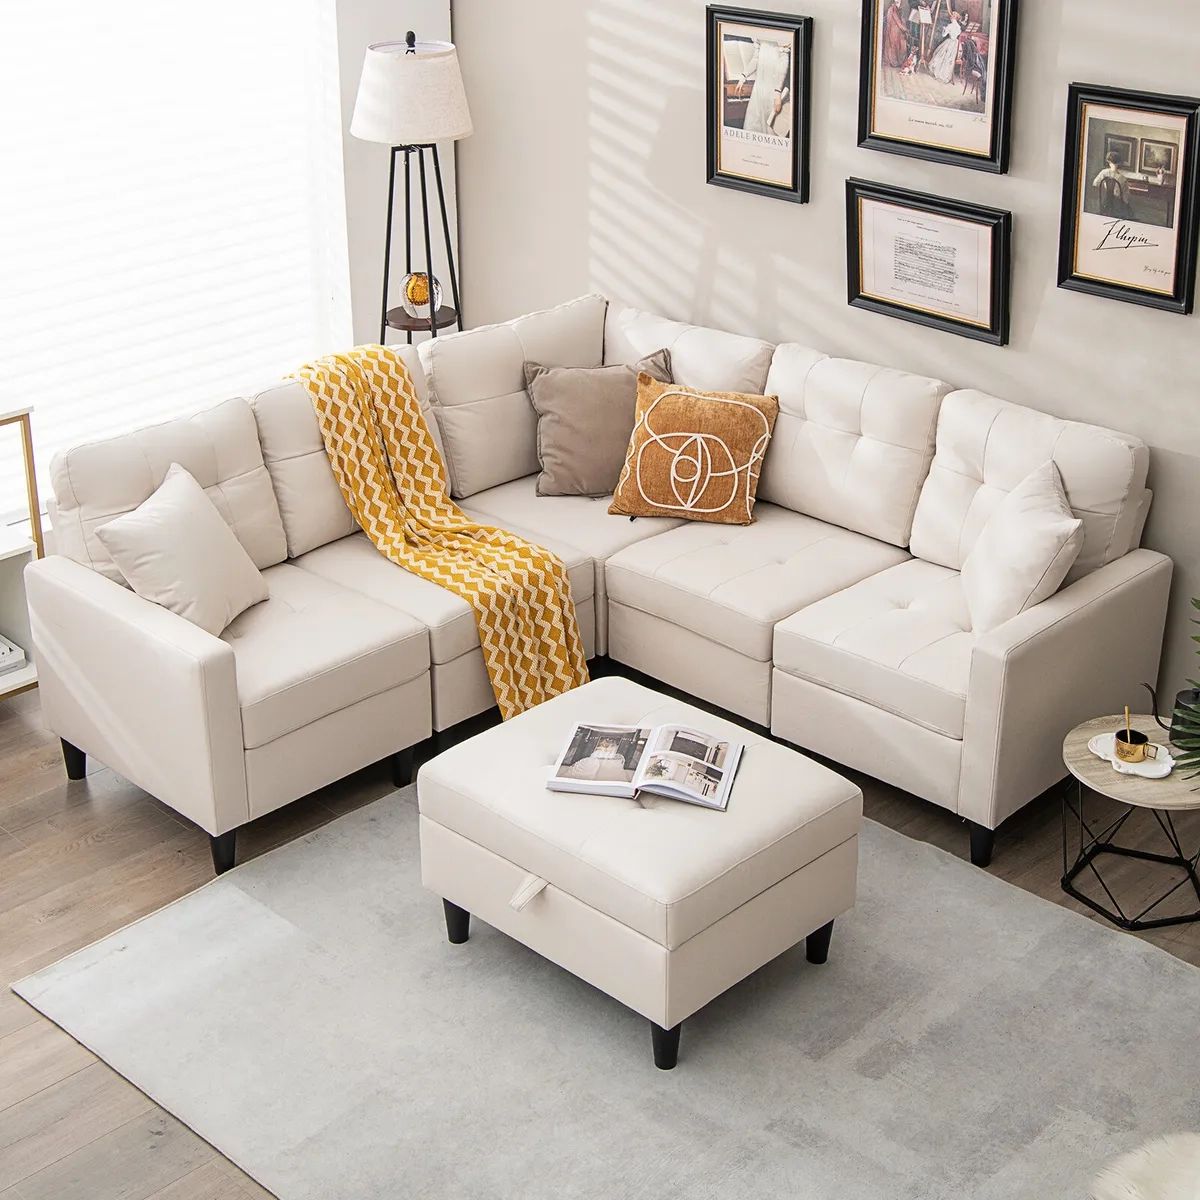 L Shaped Sectional Corner Sofa Set W/ Removable Ottoman & Seat Cushions  Beige | Ebay Pertaining To Beige L Shaped Sectional Sofas (Photo 5 of 15)